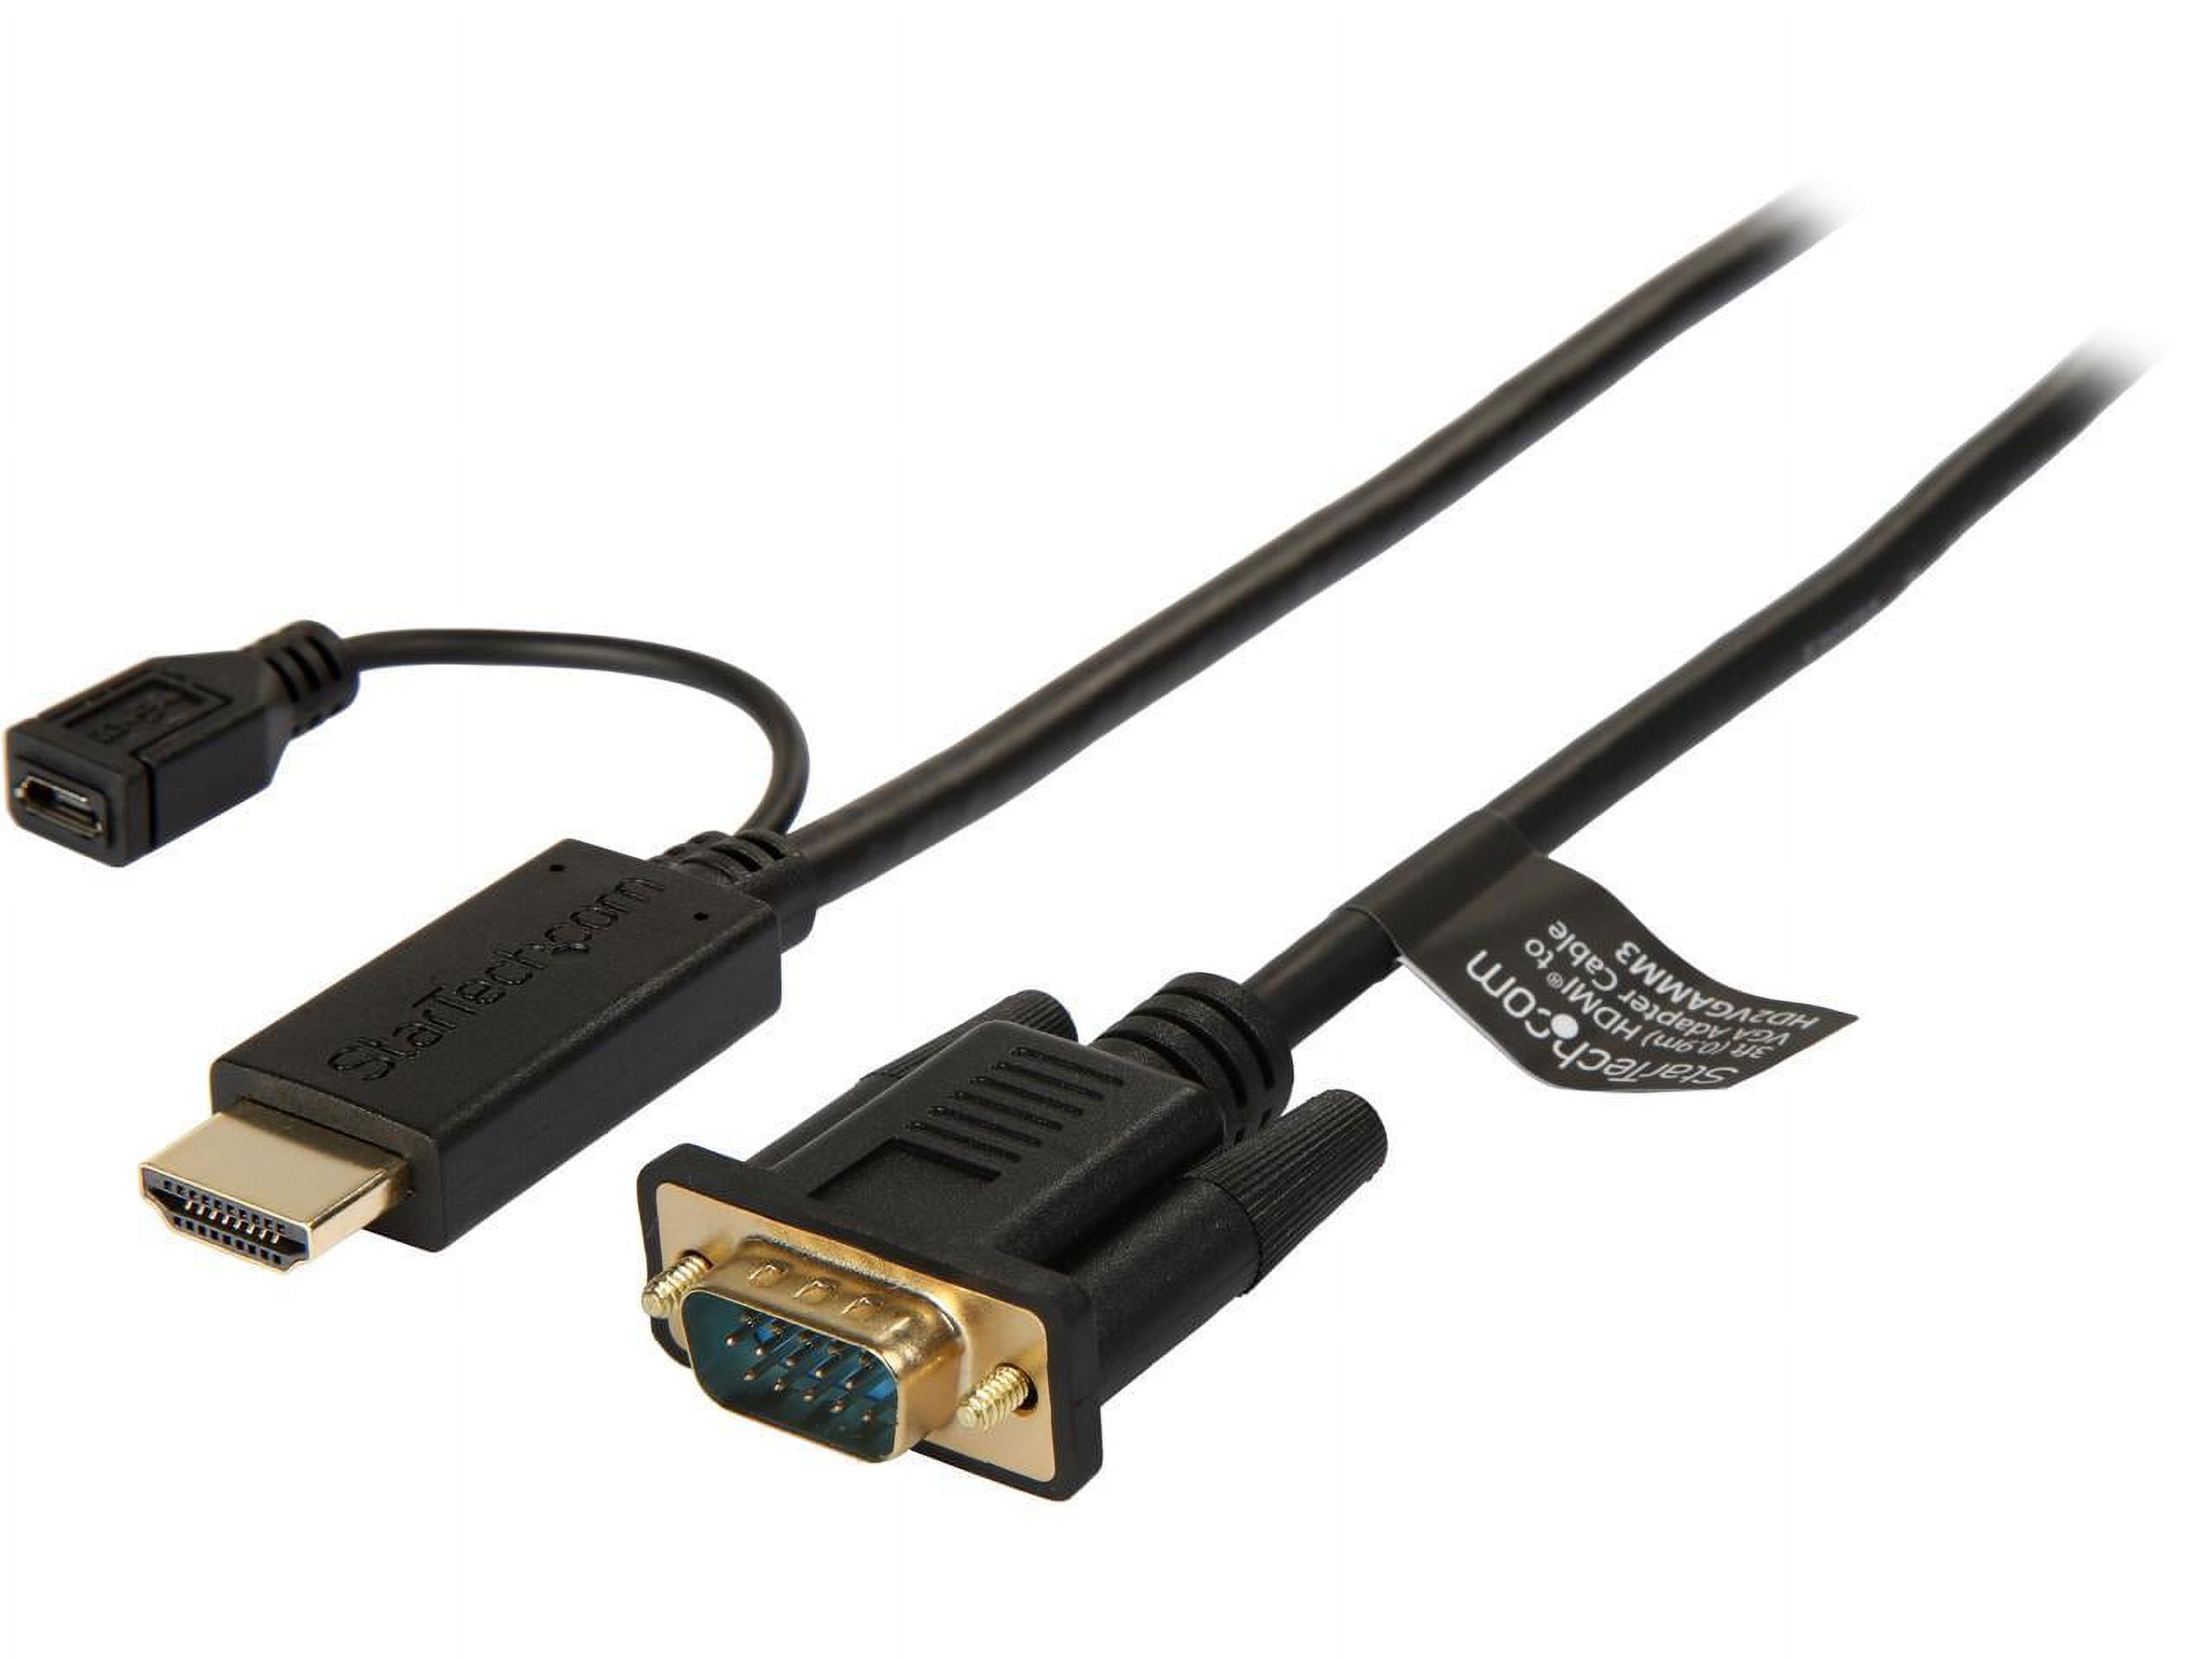 StarTech HD2VGAMM3 HDMI to VGA Cable - 3 ft. / 1m - 1080p - 1920 x 1200  - Active HDMI Cable - Monitor Cable - Computer Cable - image 1 of 3